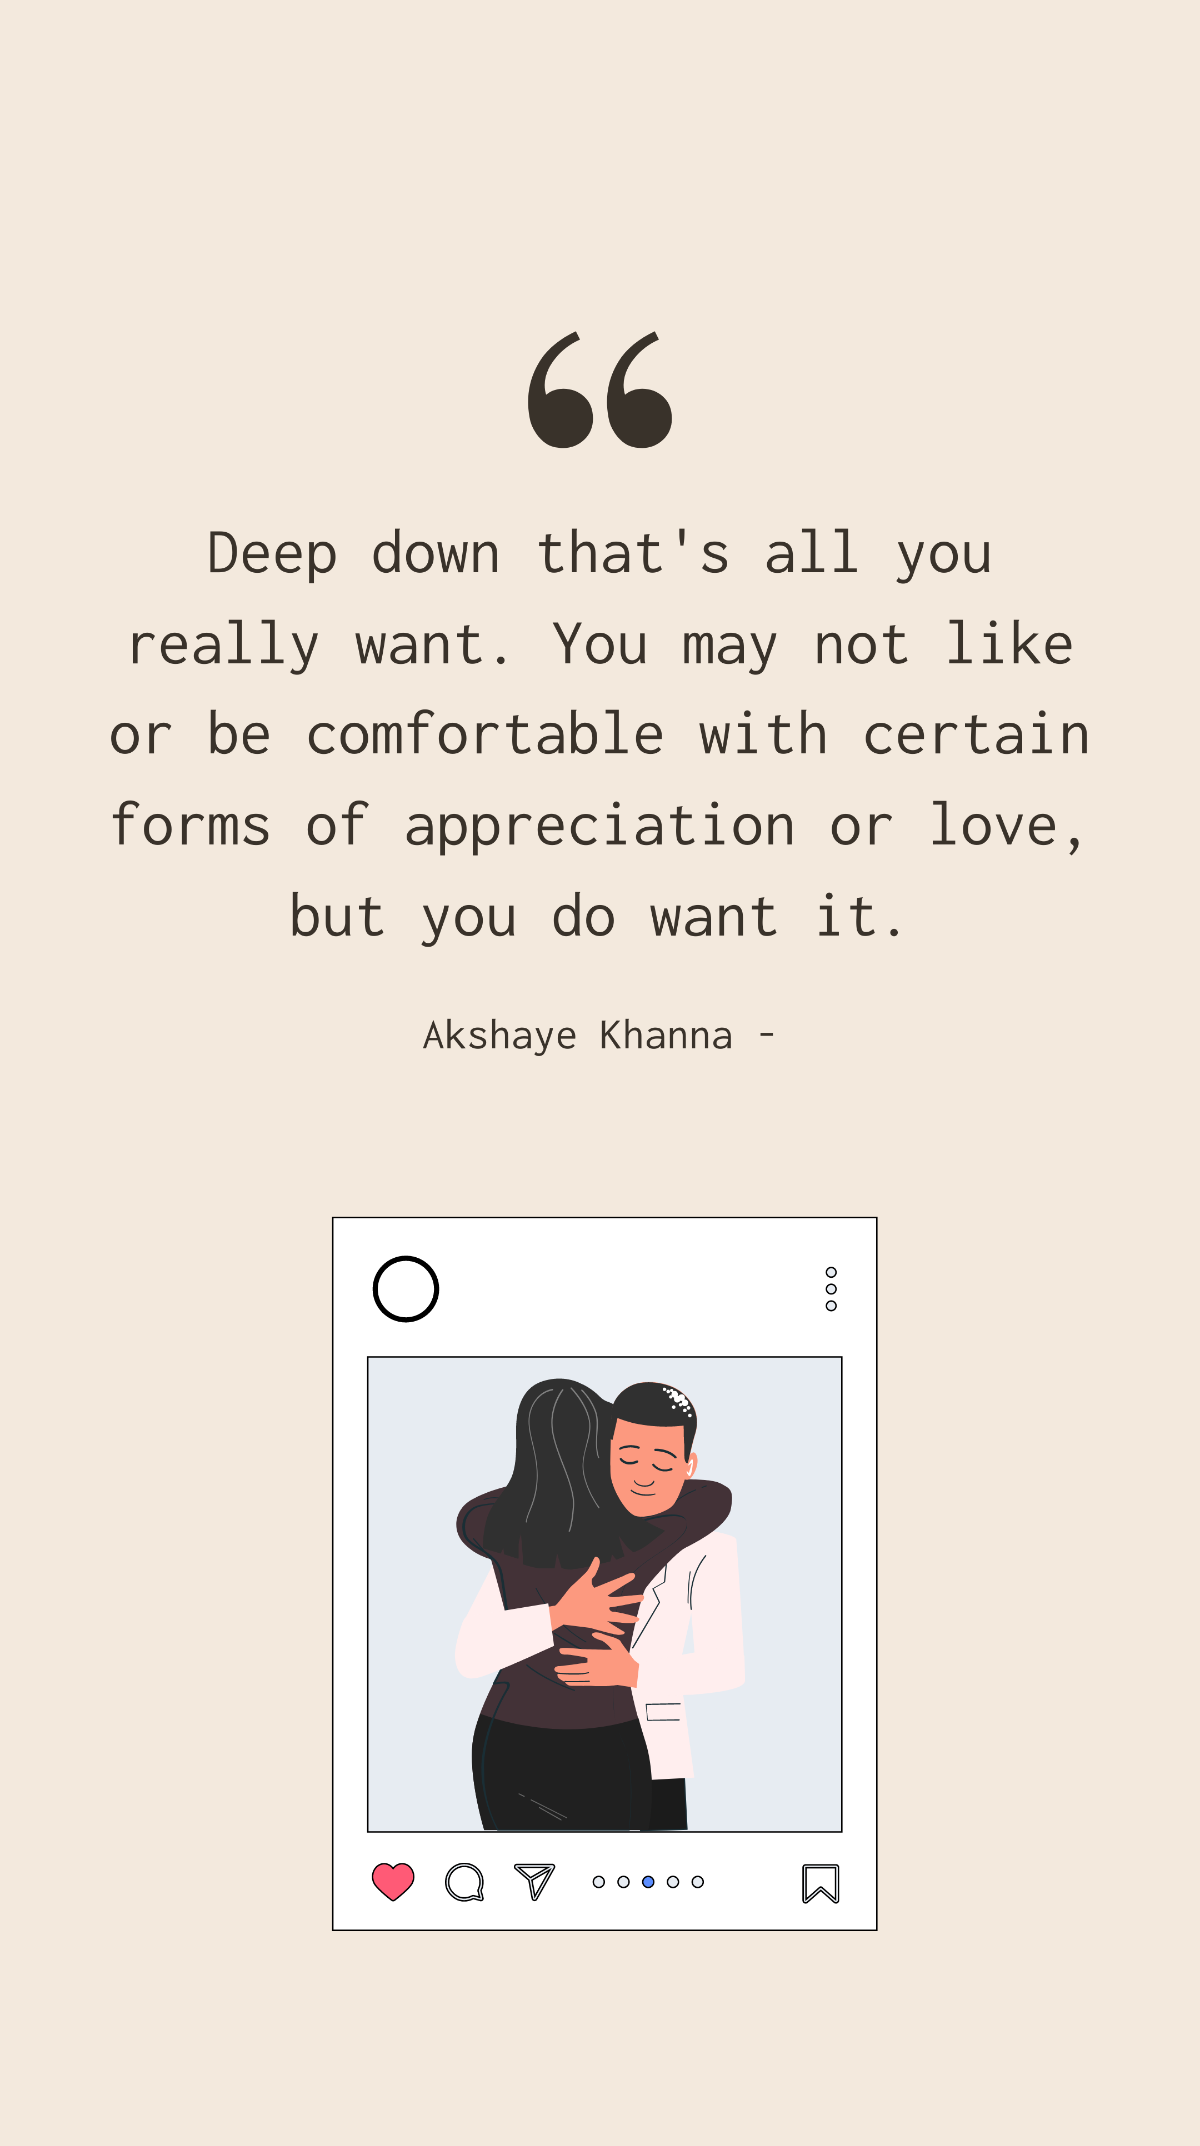 Akshaye Khanna - Deep down that's all you really want. You may not like or be comfortable with certain forms of appreciation or love, but you do want it.